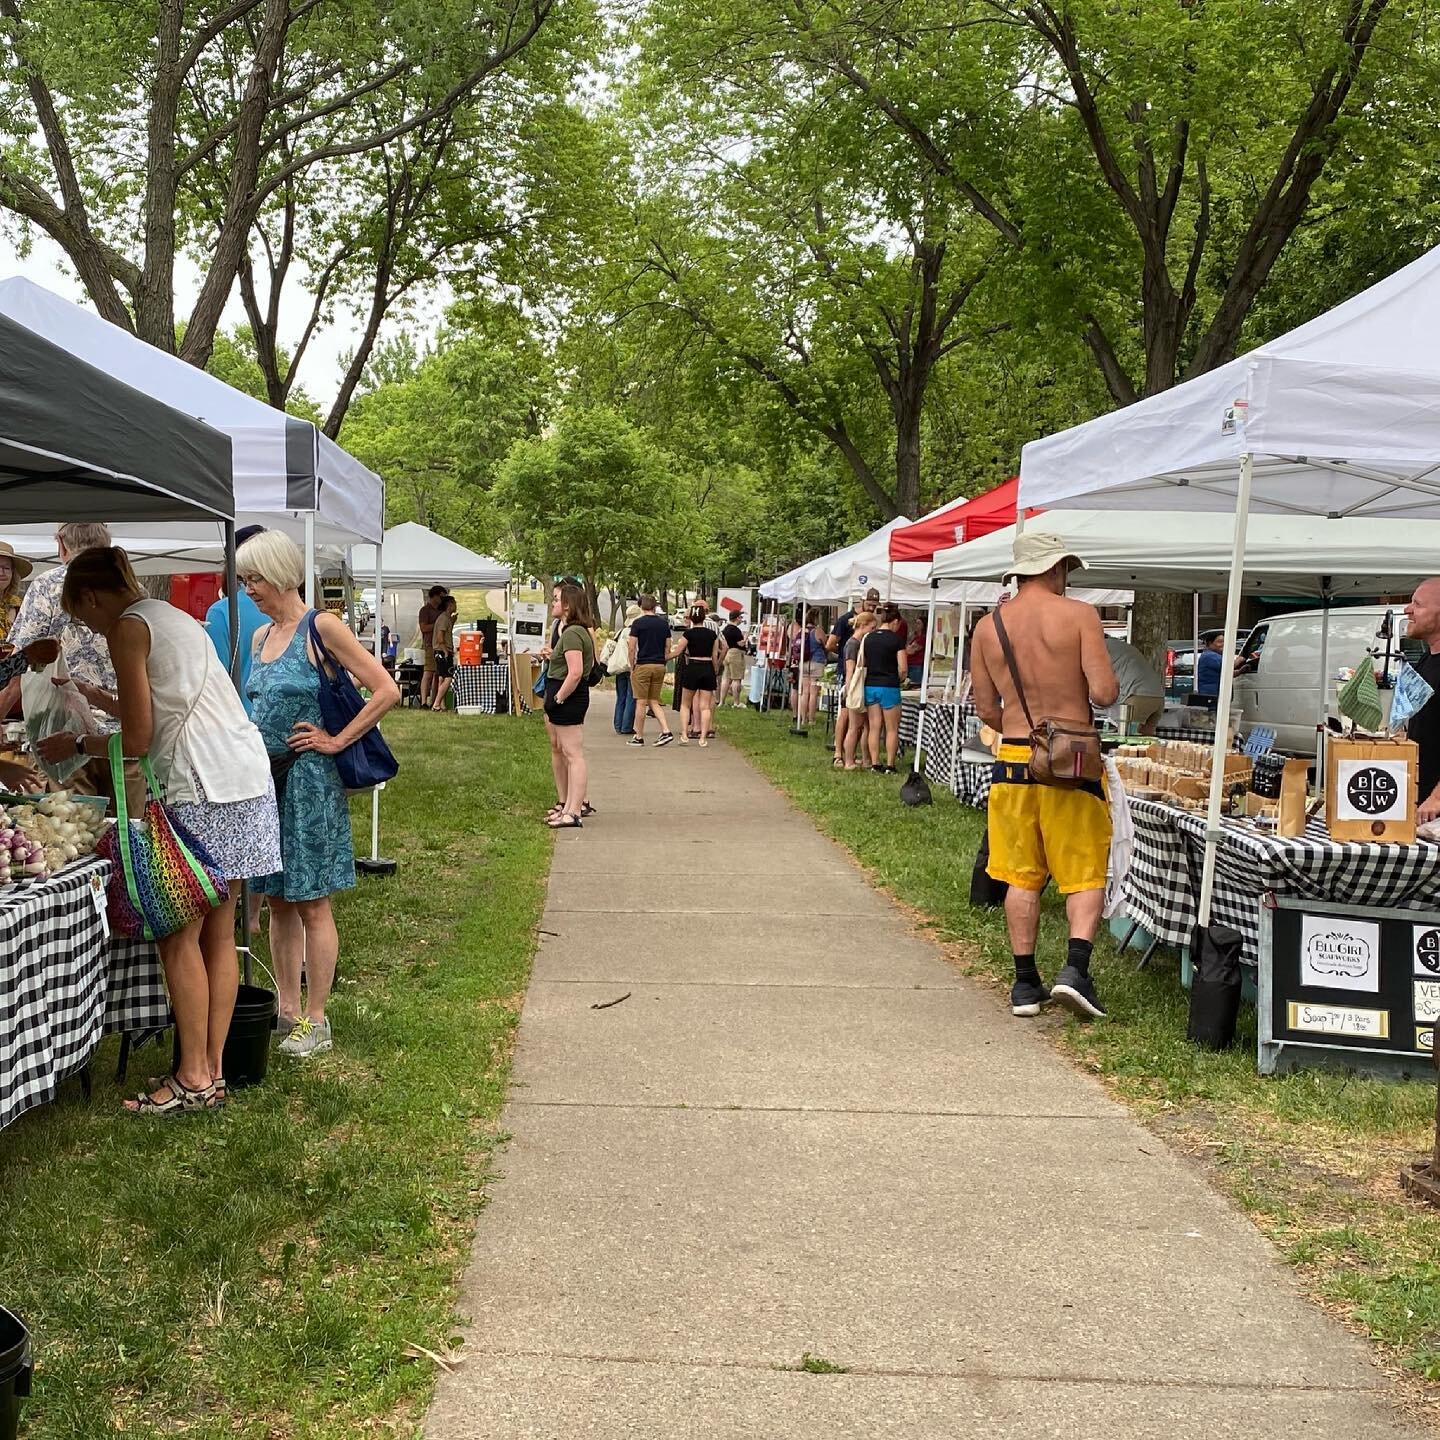 We had a fabulous opening day!  Beautiful produce, eggs, chickens, juice, coffee, popsicles and LIVE MUSIC.  Come see what&rsquo;s in store this week!  4-8 on Thursdays!